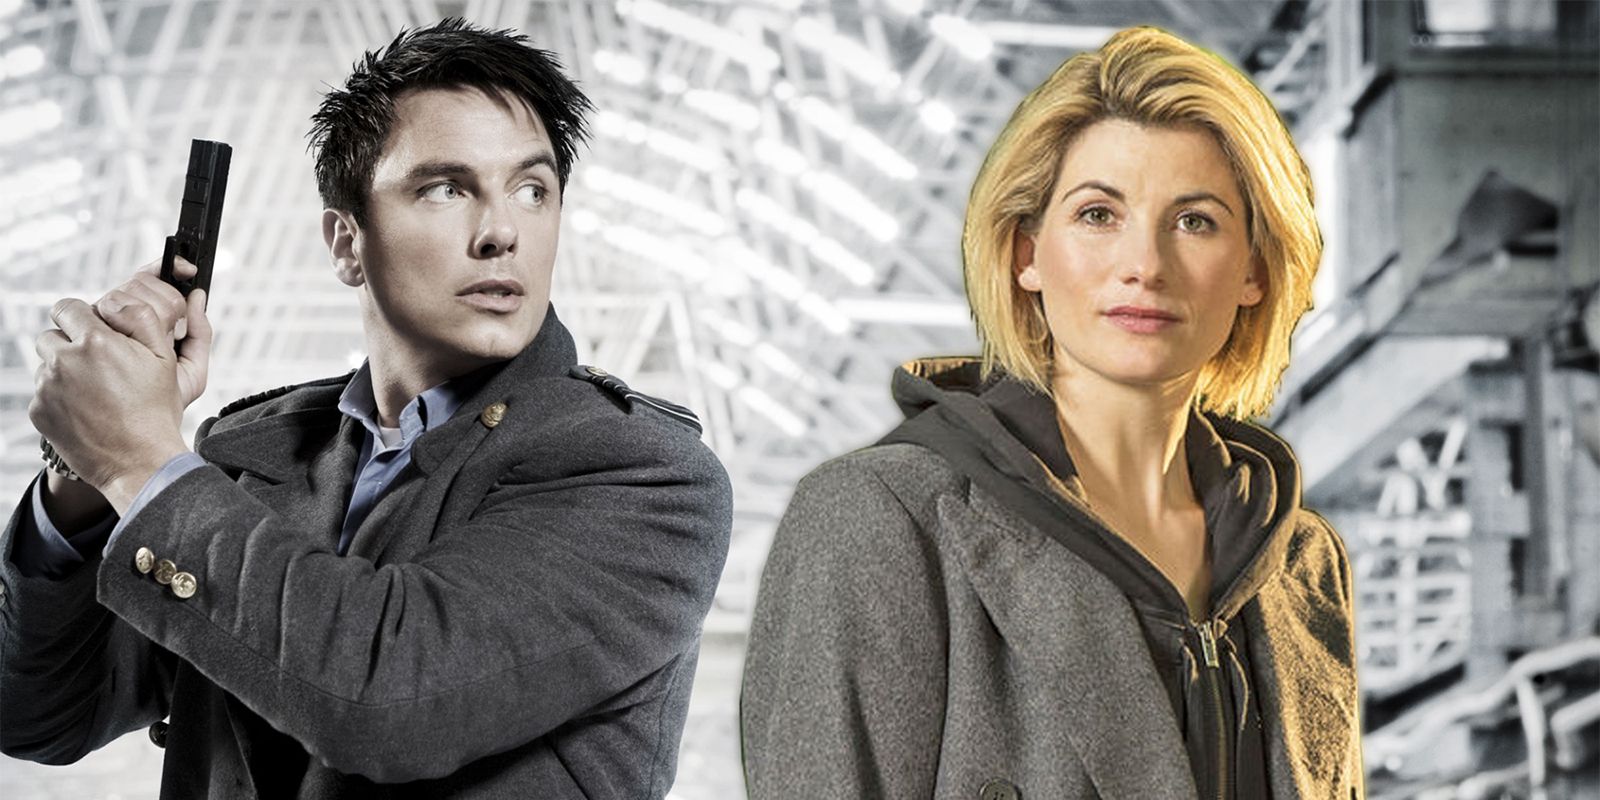 John Barrowman as Jack Harkness and Jodie Whittaker as the Doctor